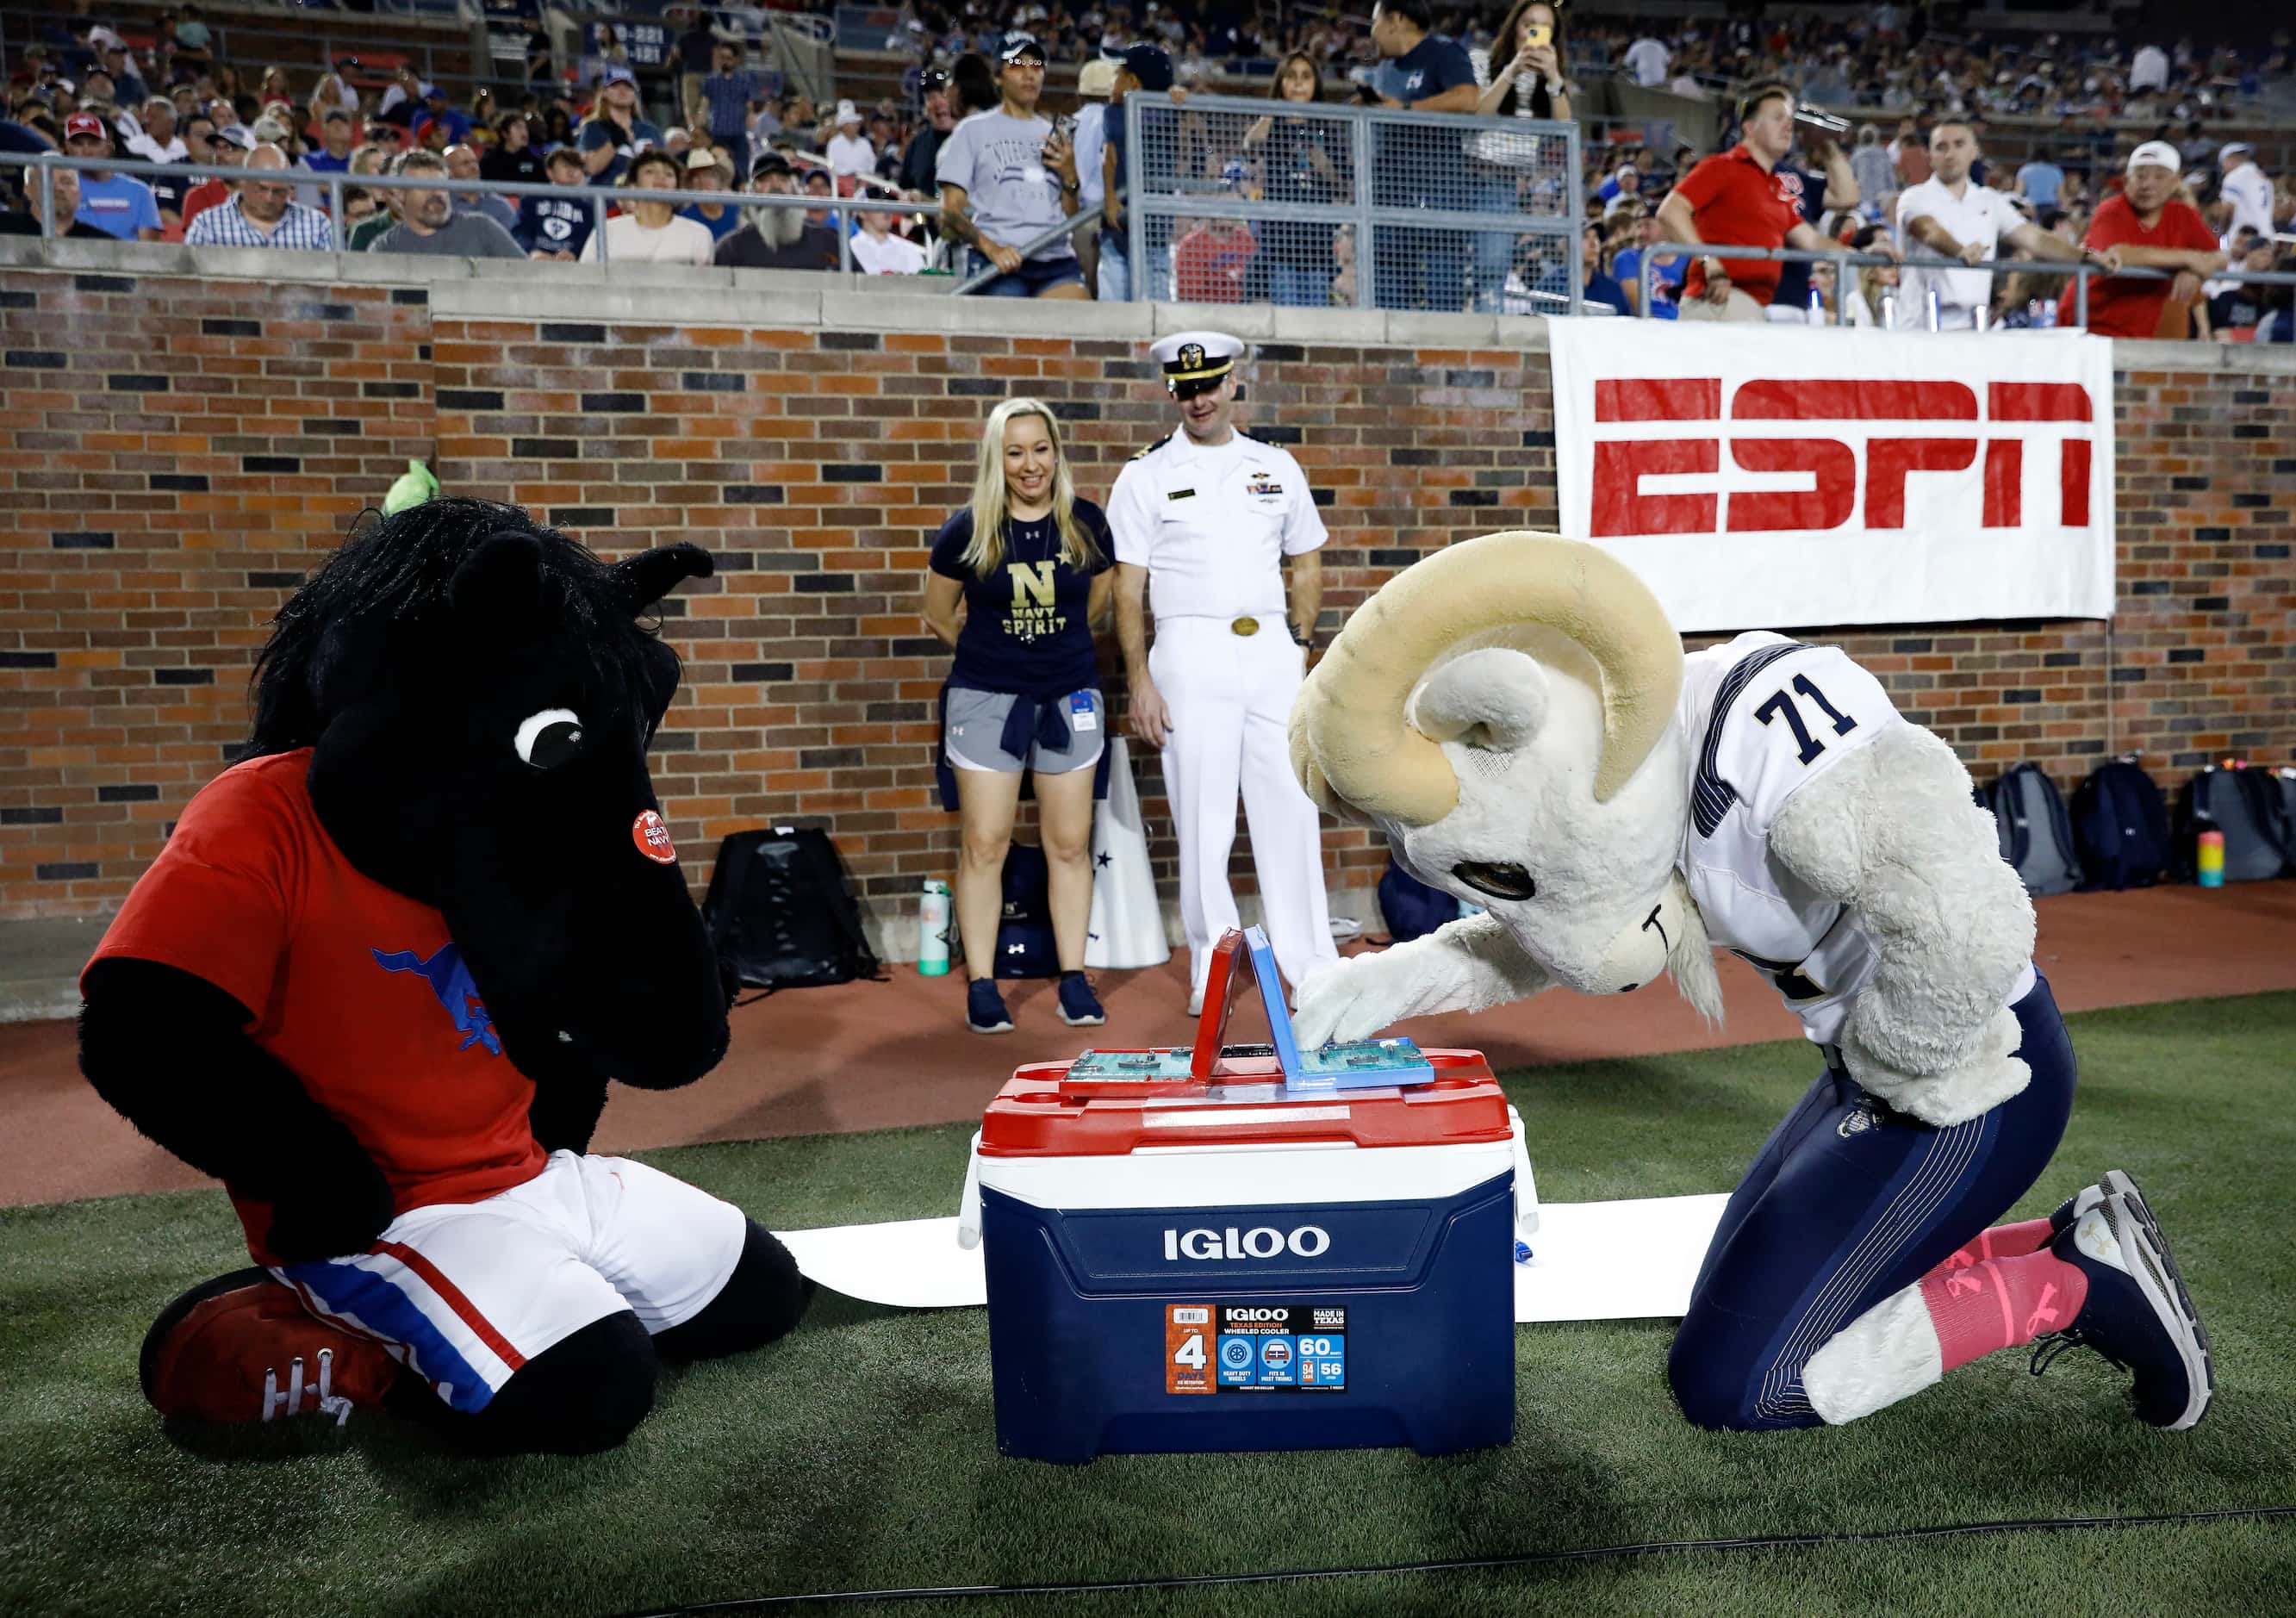 The Southern Methodist Mustangs mascot and the Navy Midshipmen mascot play a game of...